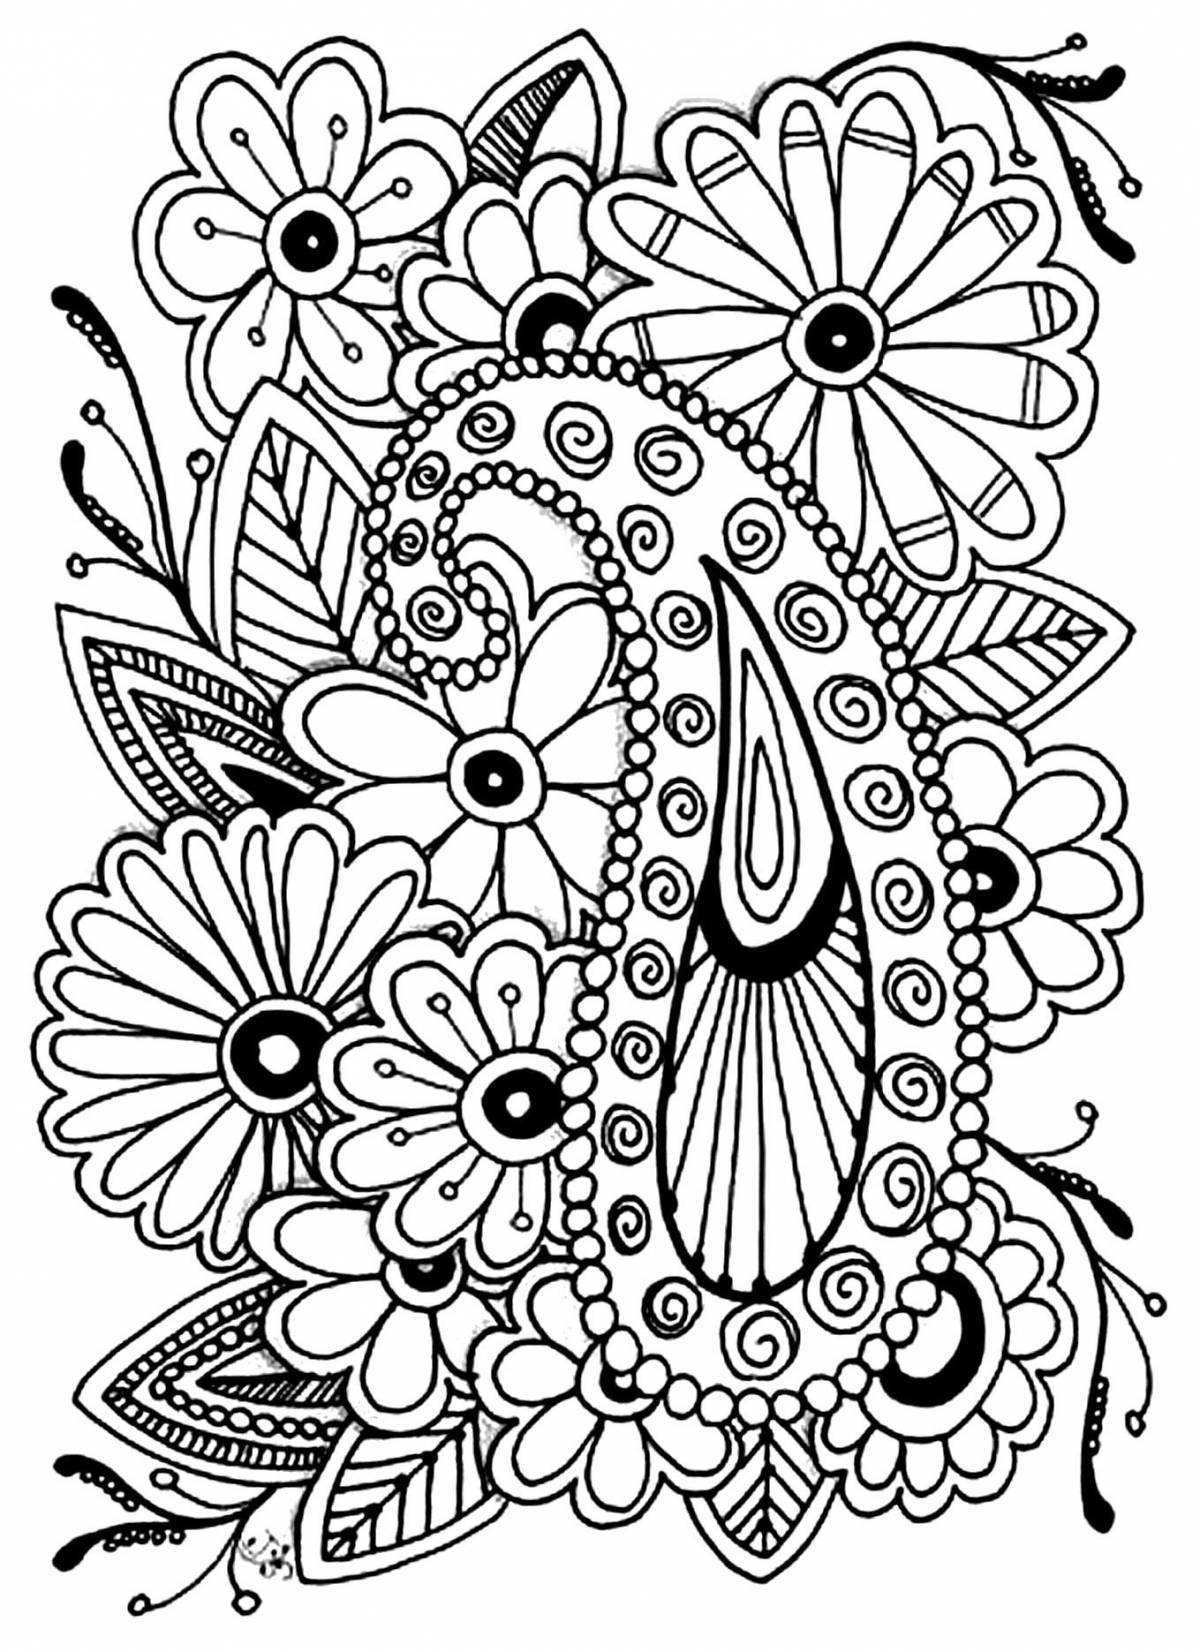 Fairytale coloring templates for girls